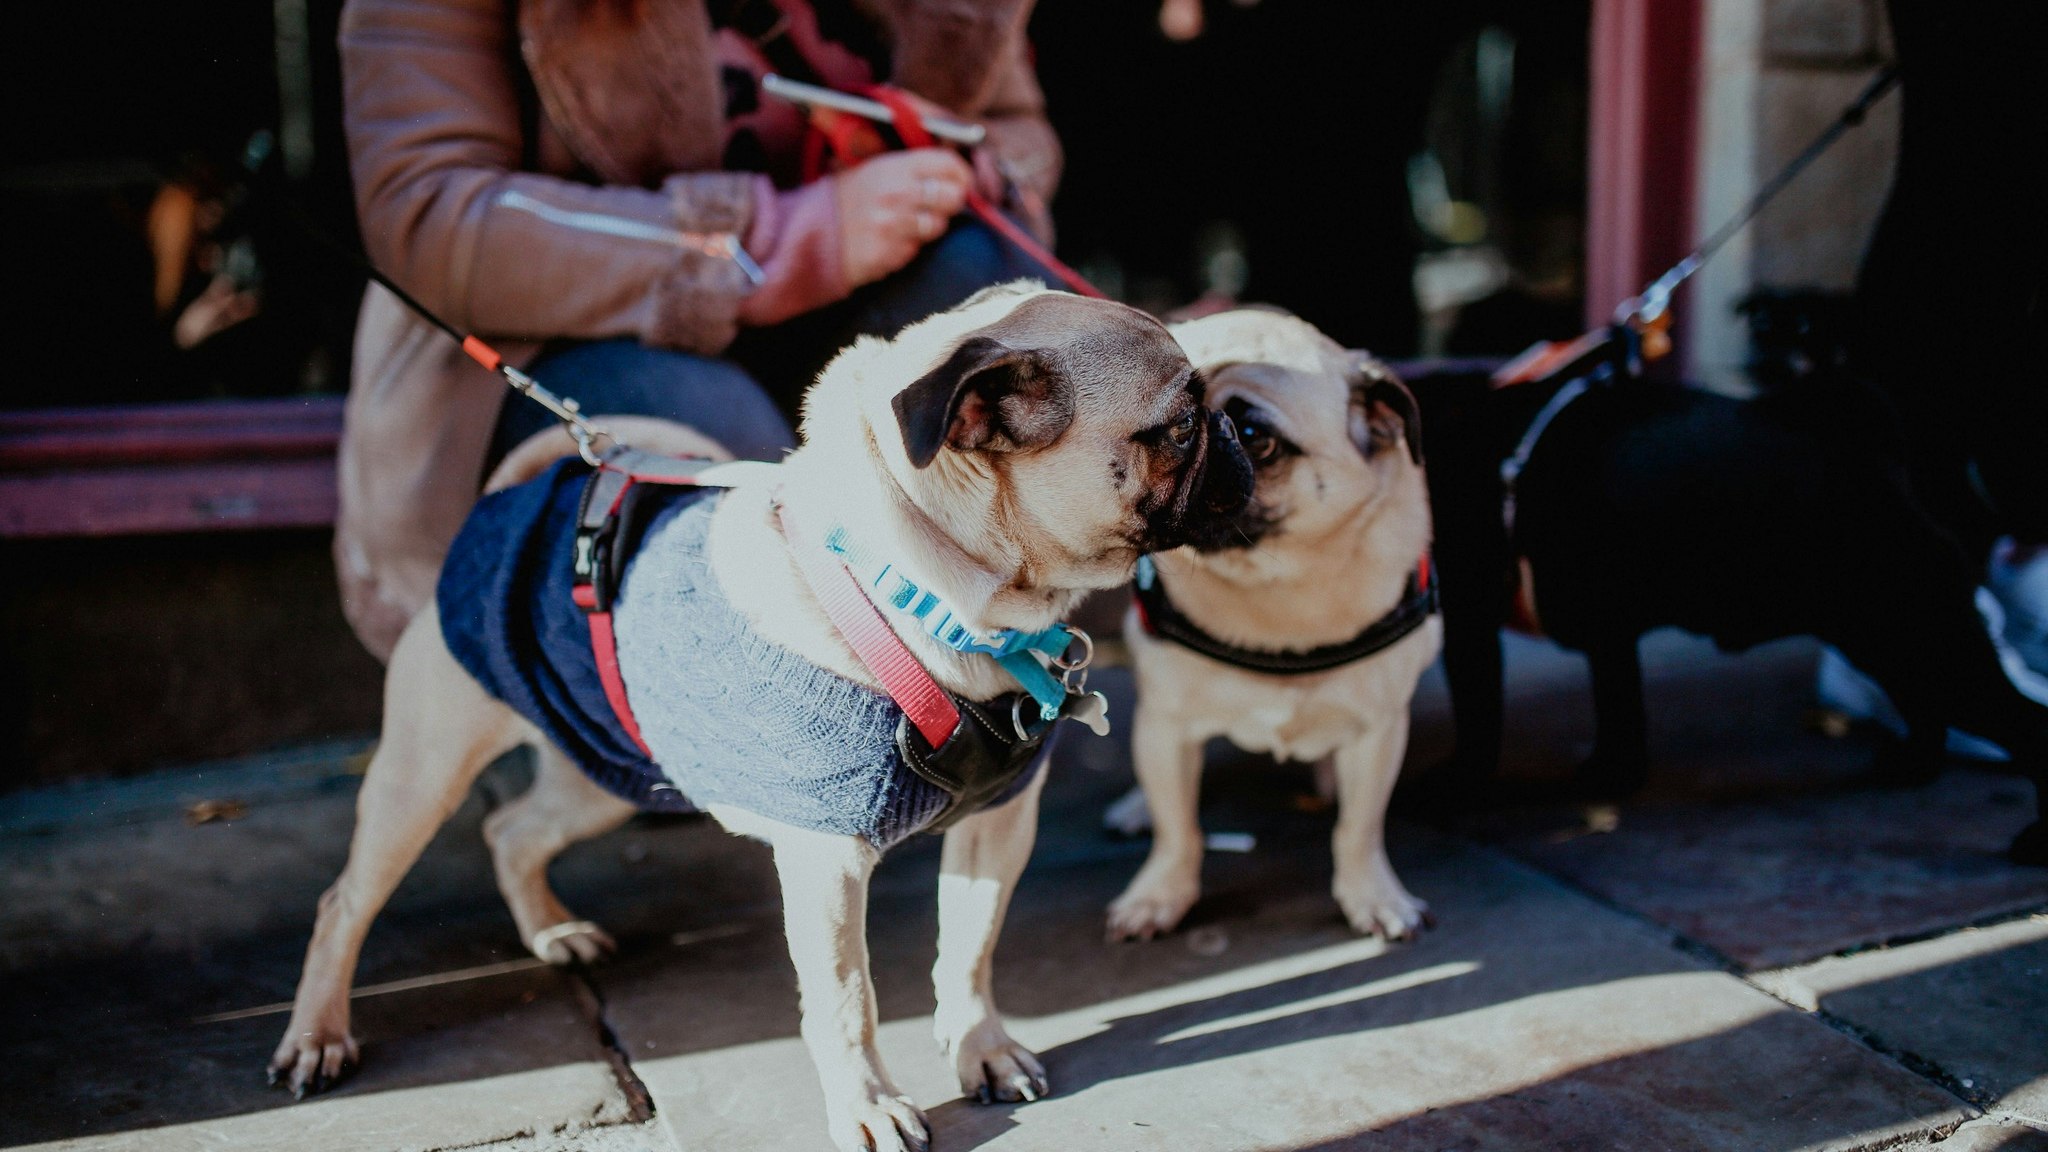 Pug Pup Up Cafe – Manchester